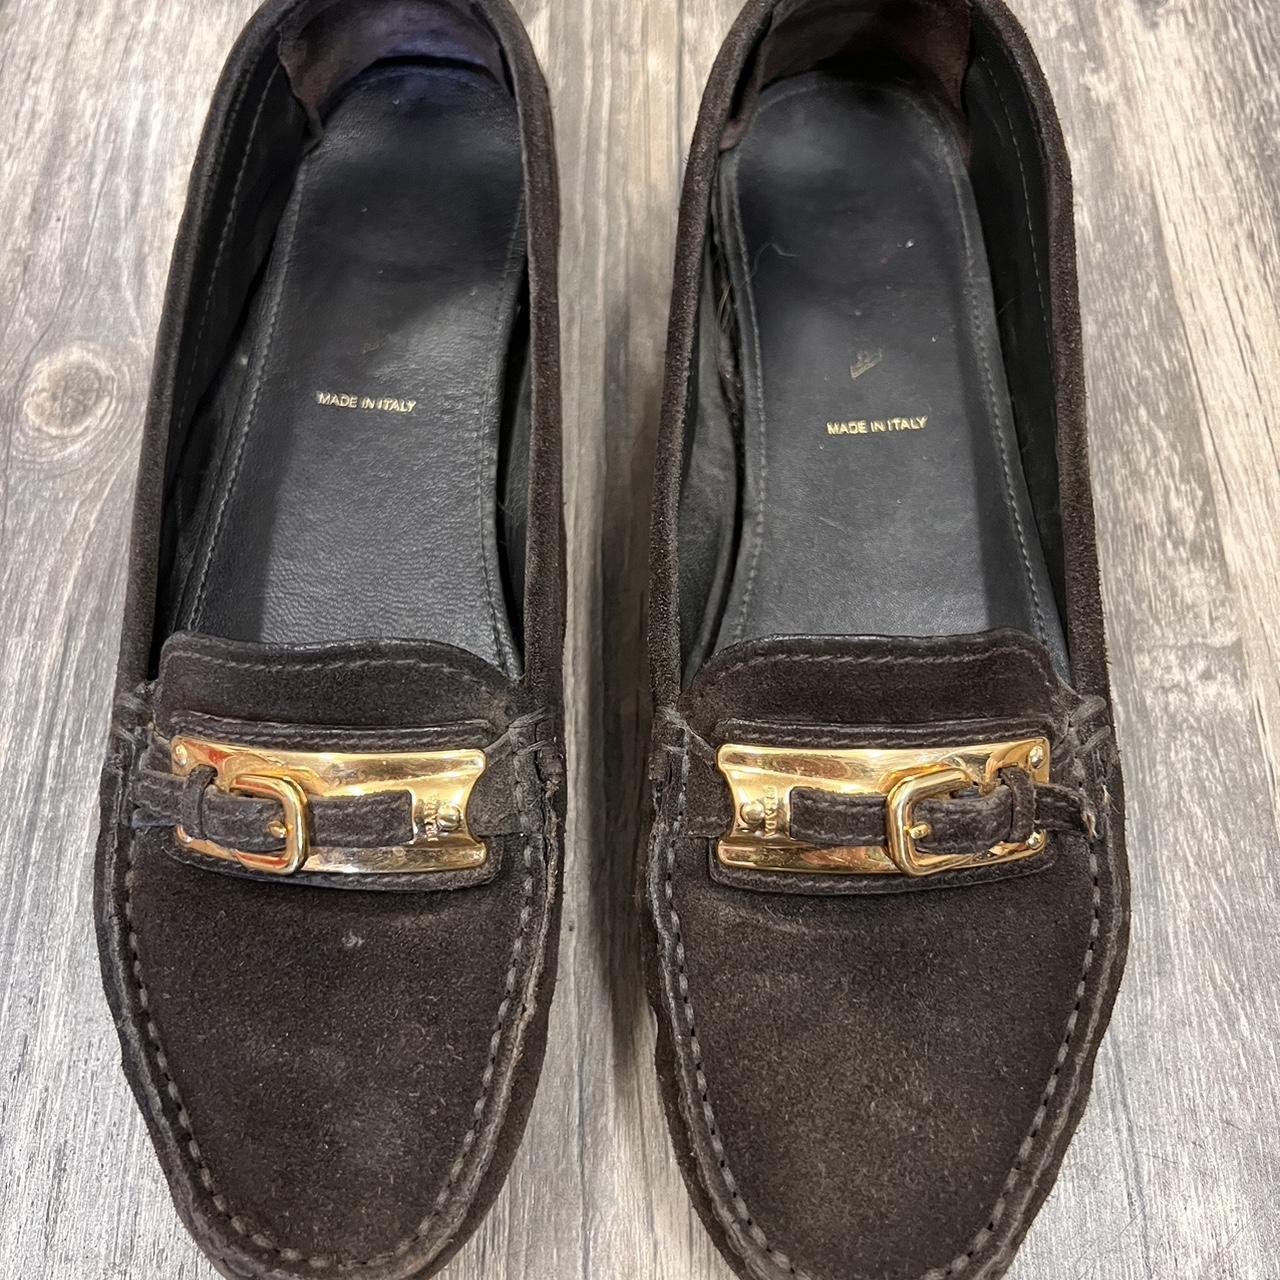 Prada Women's Brown and Gold Loafers | Depop